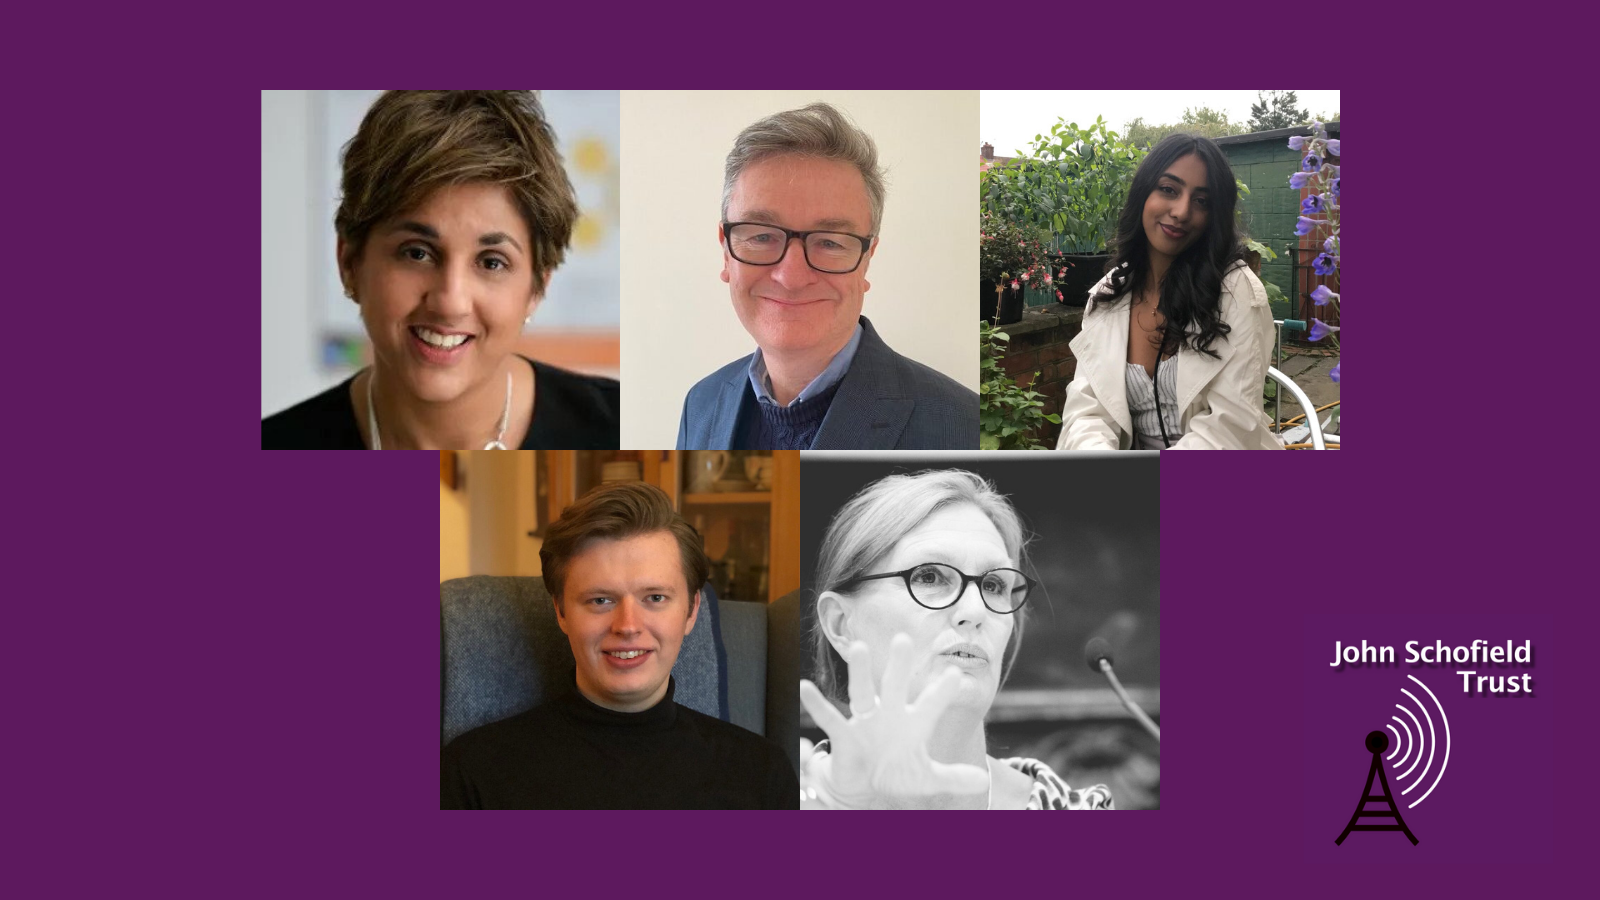 A purple graphic with photos of (clockwise from top left): Zaiba Malik, David Stenhouse, Shayma Bakht, Kate Riley and Tristan Marris. In the bottom right is the Trust logo.